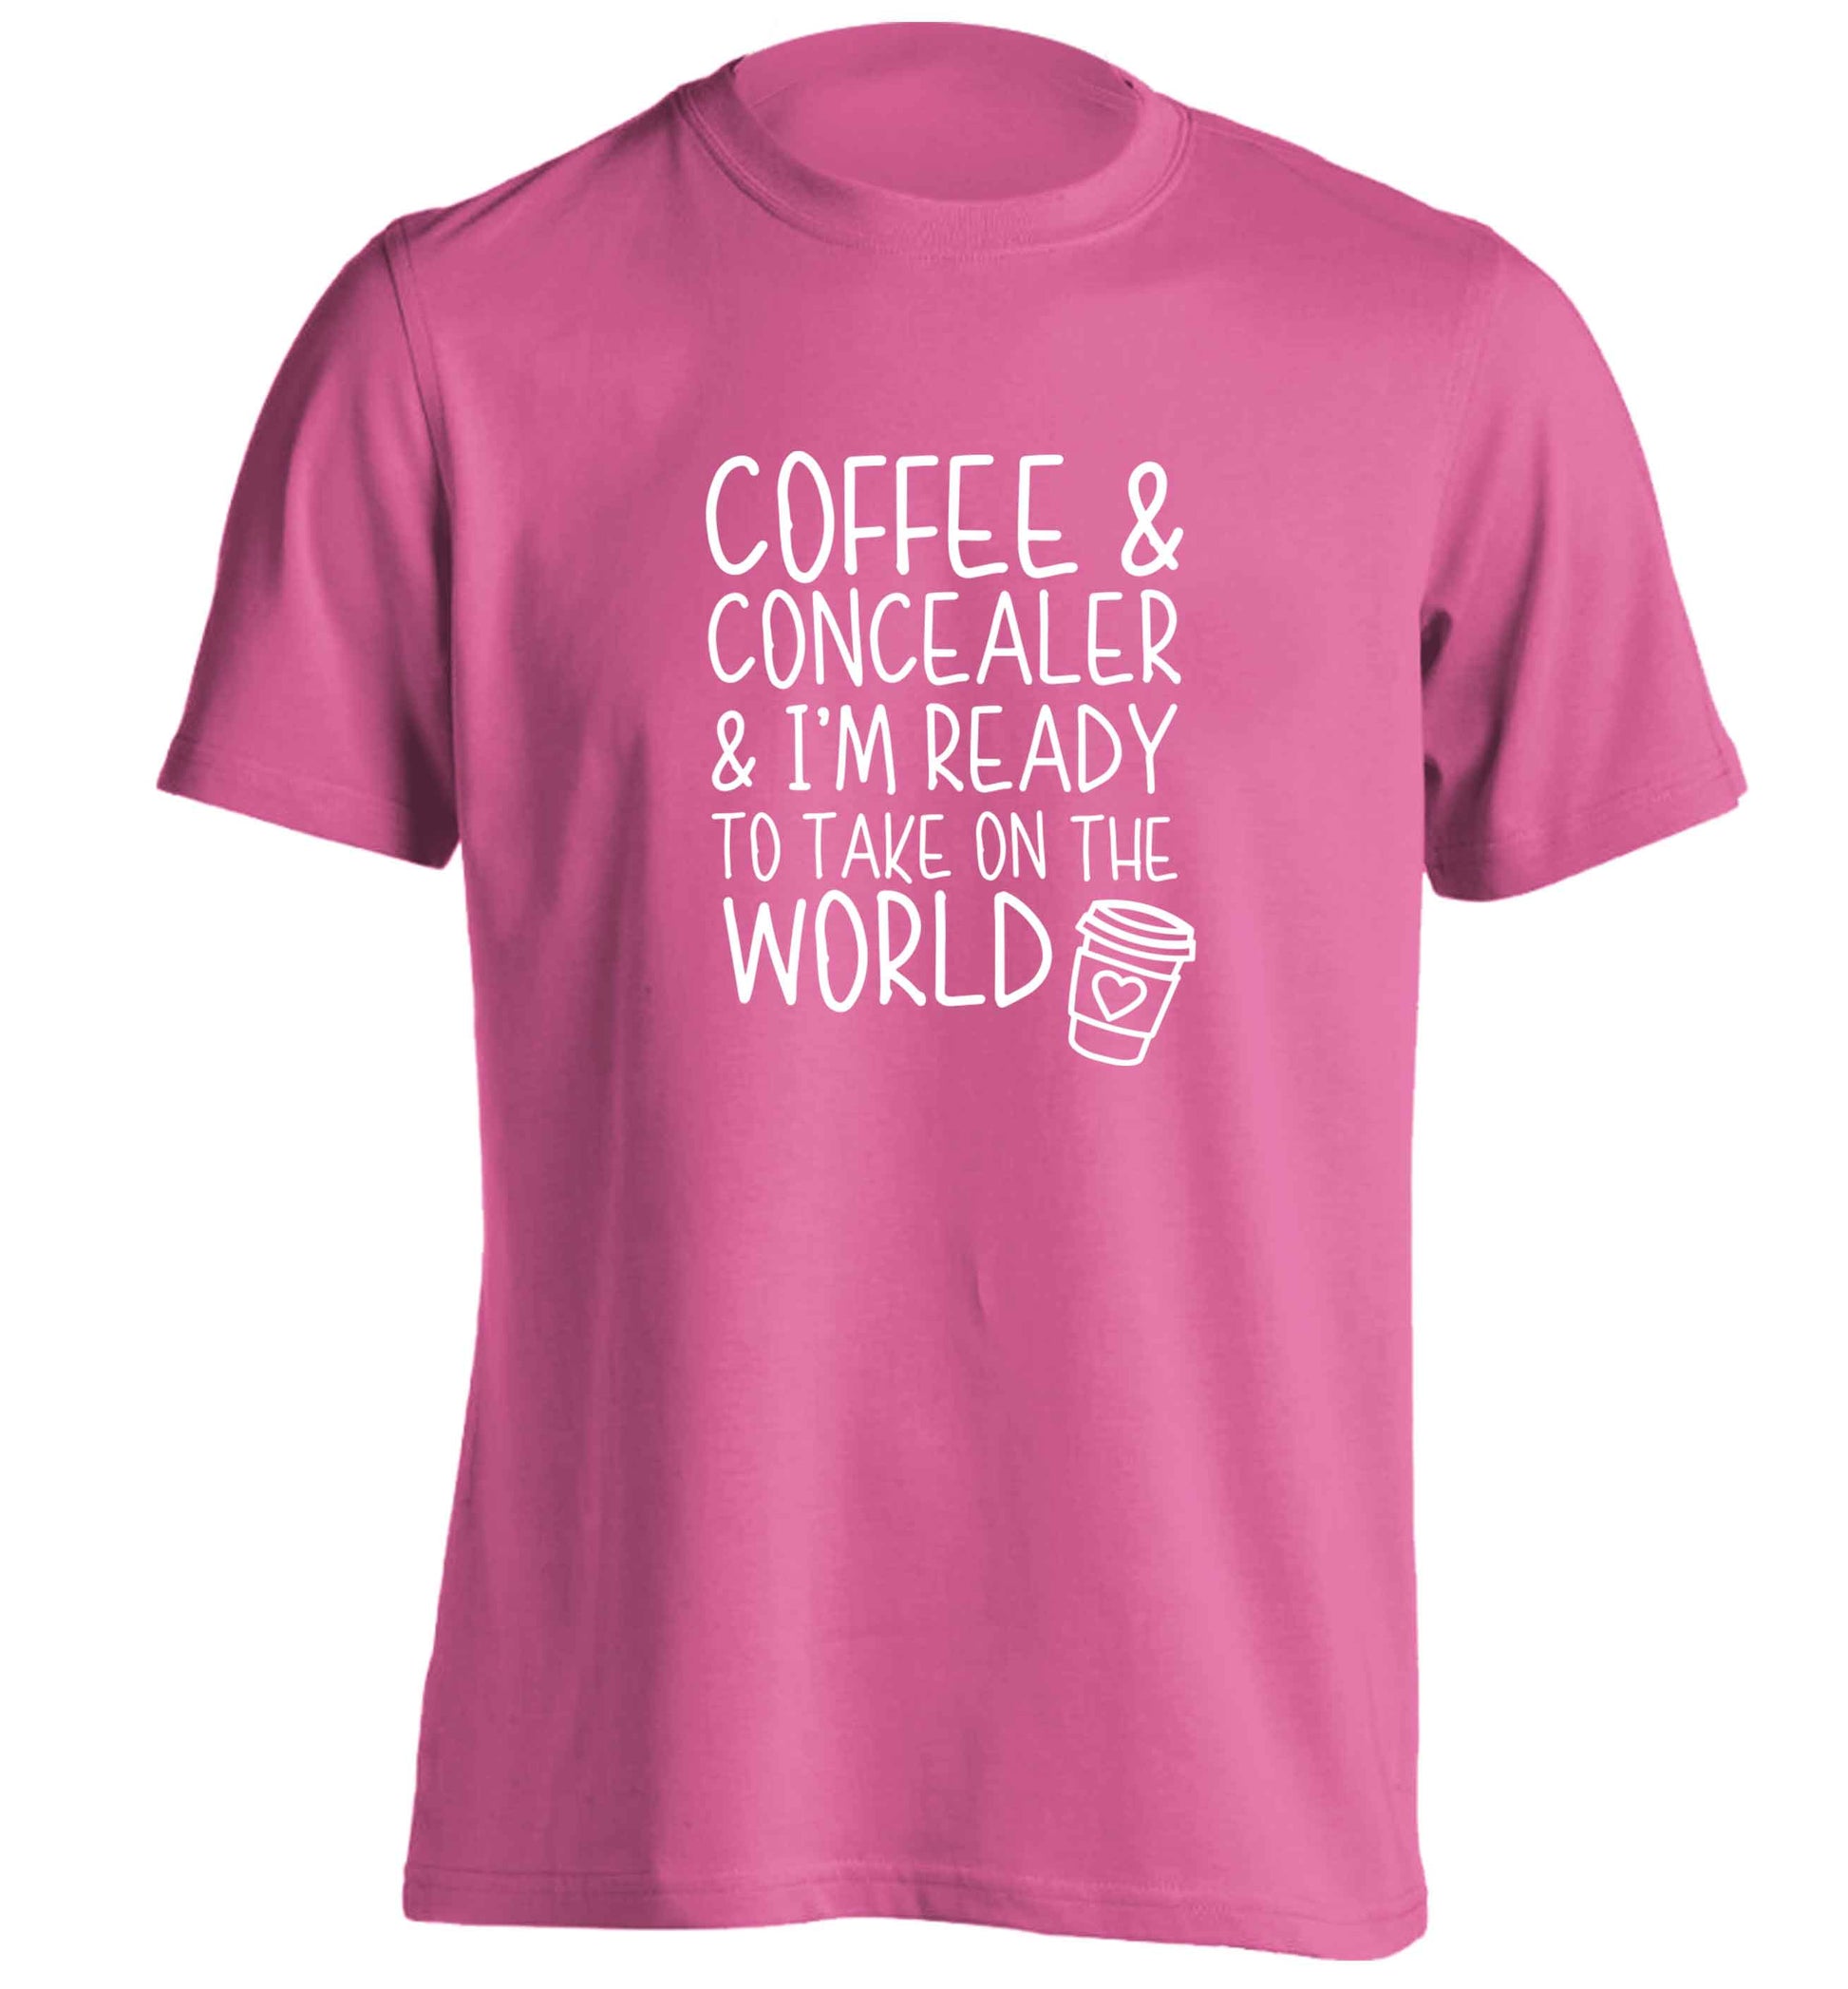 Coffee and concealer and I'm ready to take on the world adults unisex pink Tshirt 2XL